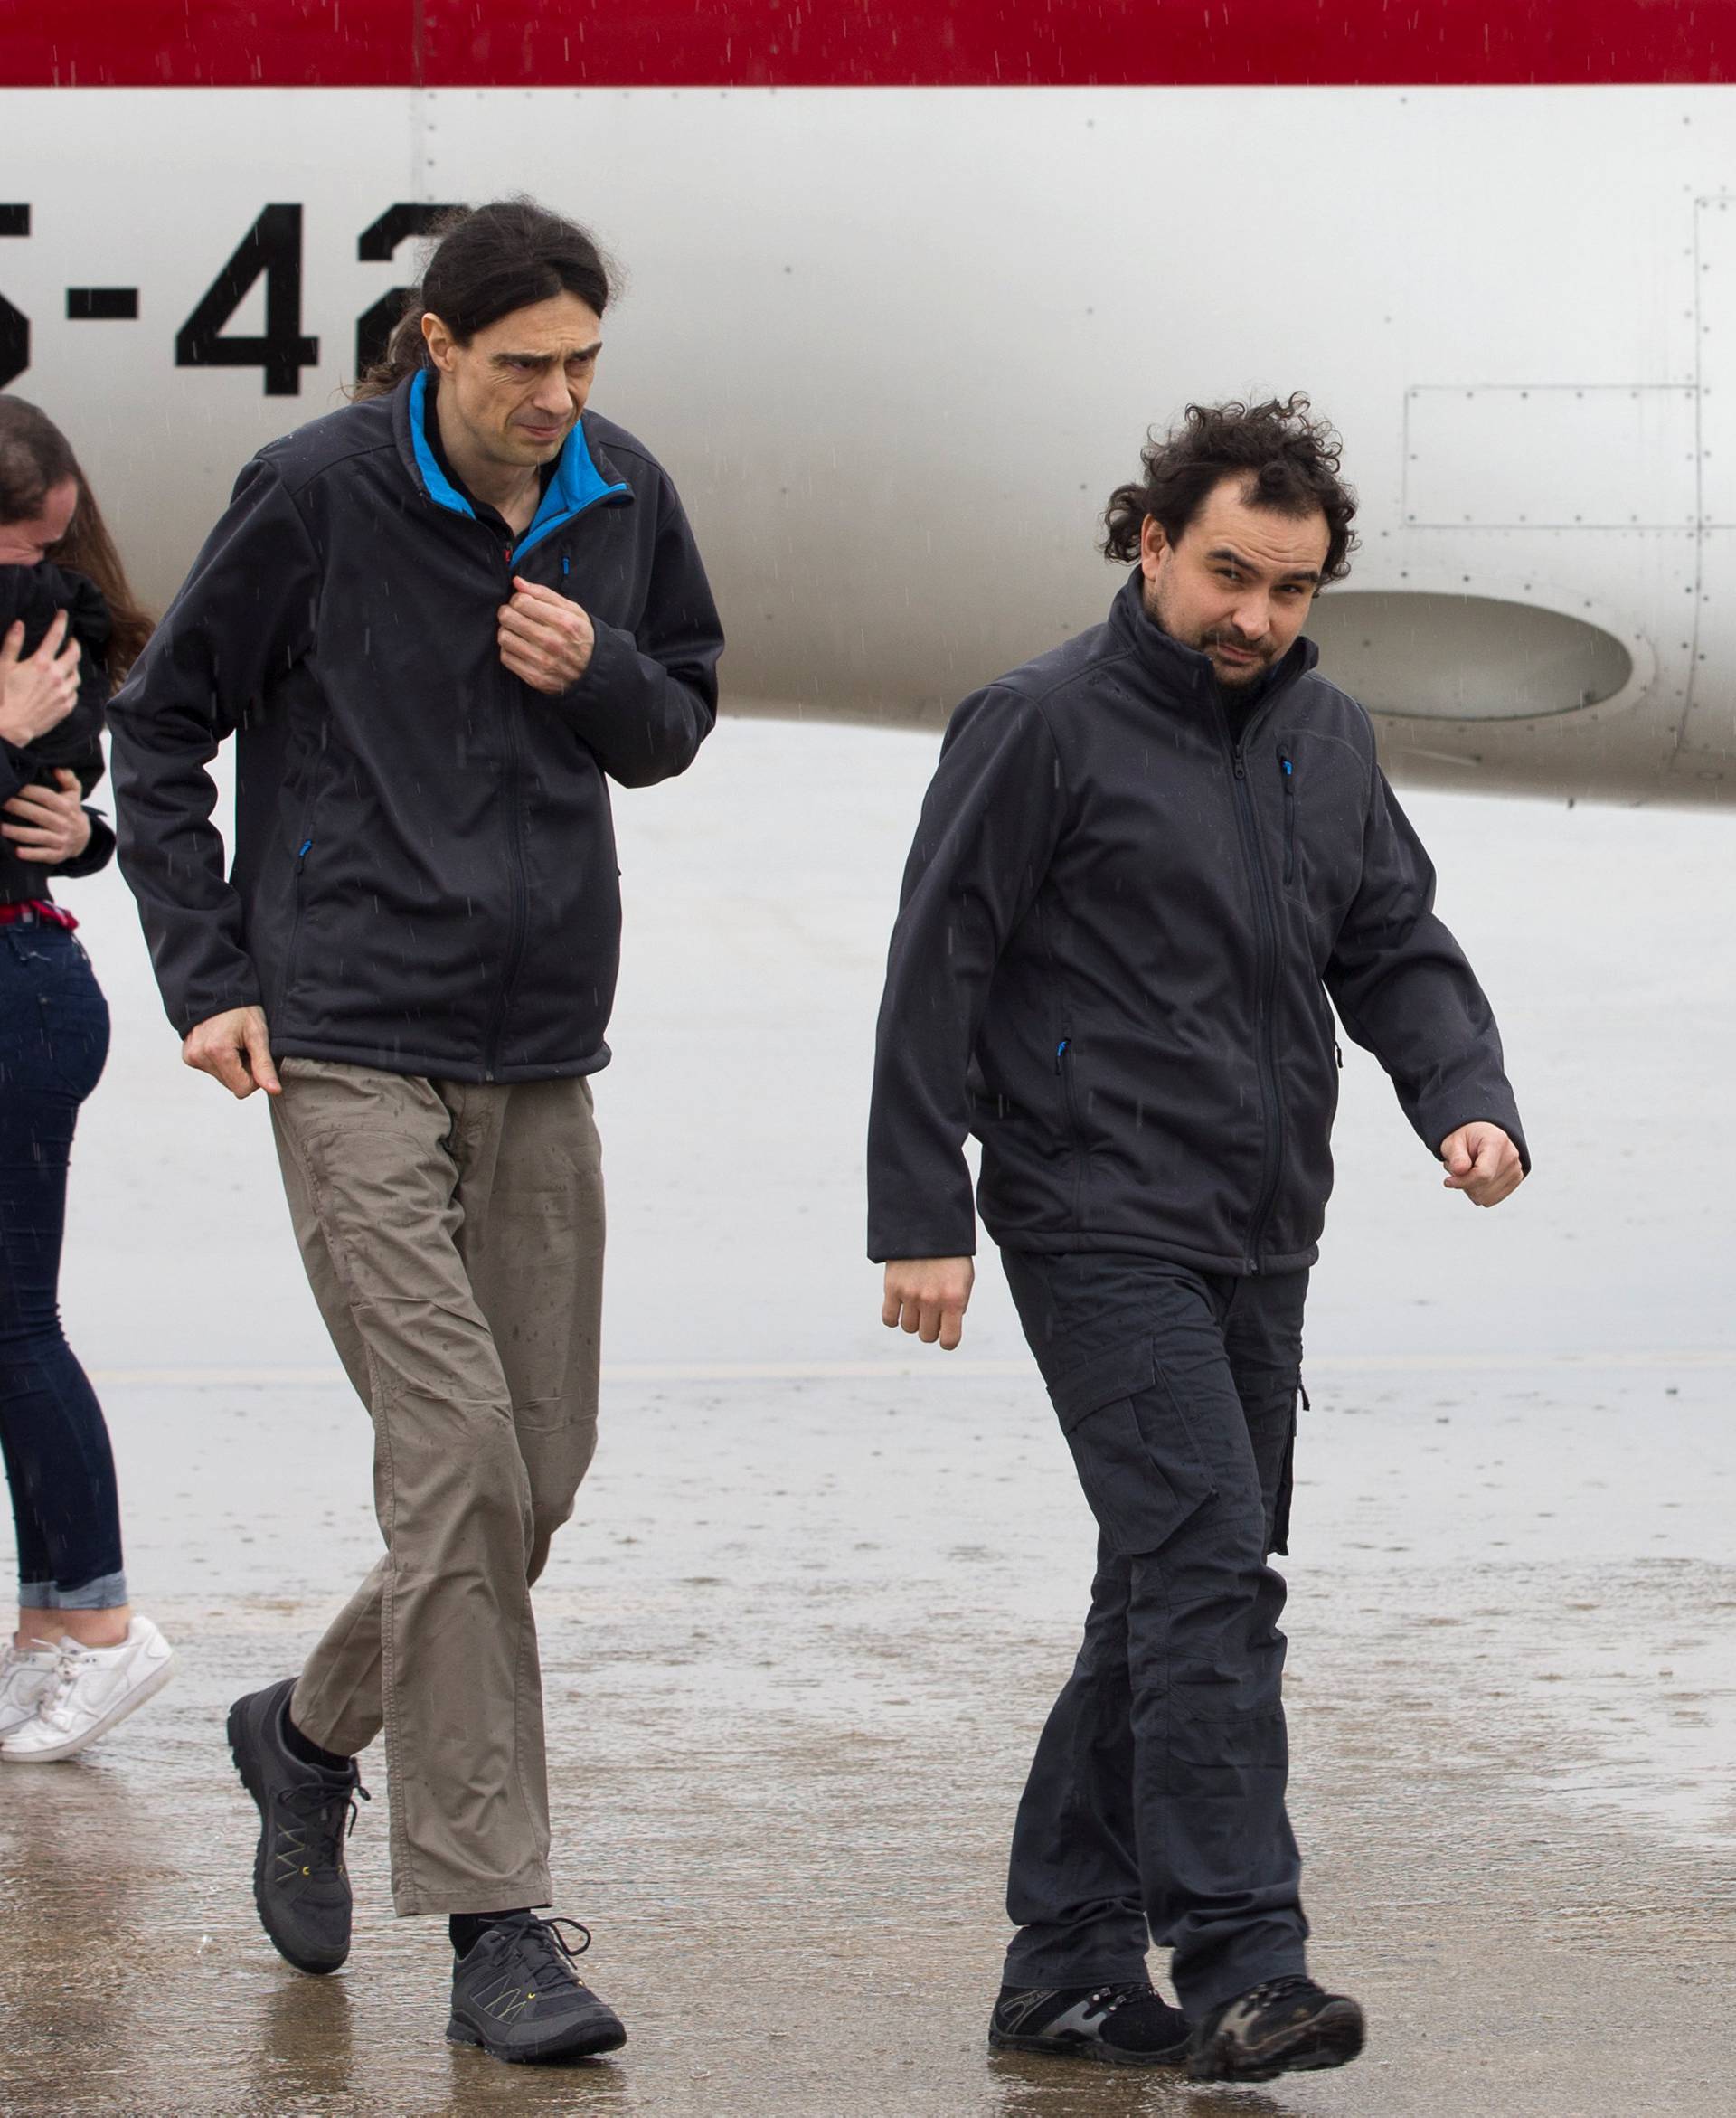 Pampliega, Lopez and Sastre, three Spanish freelance journalists who went missing in Syria last year and were believed to have been kidnapped, arrive at Torrejon's military airport, Spain